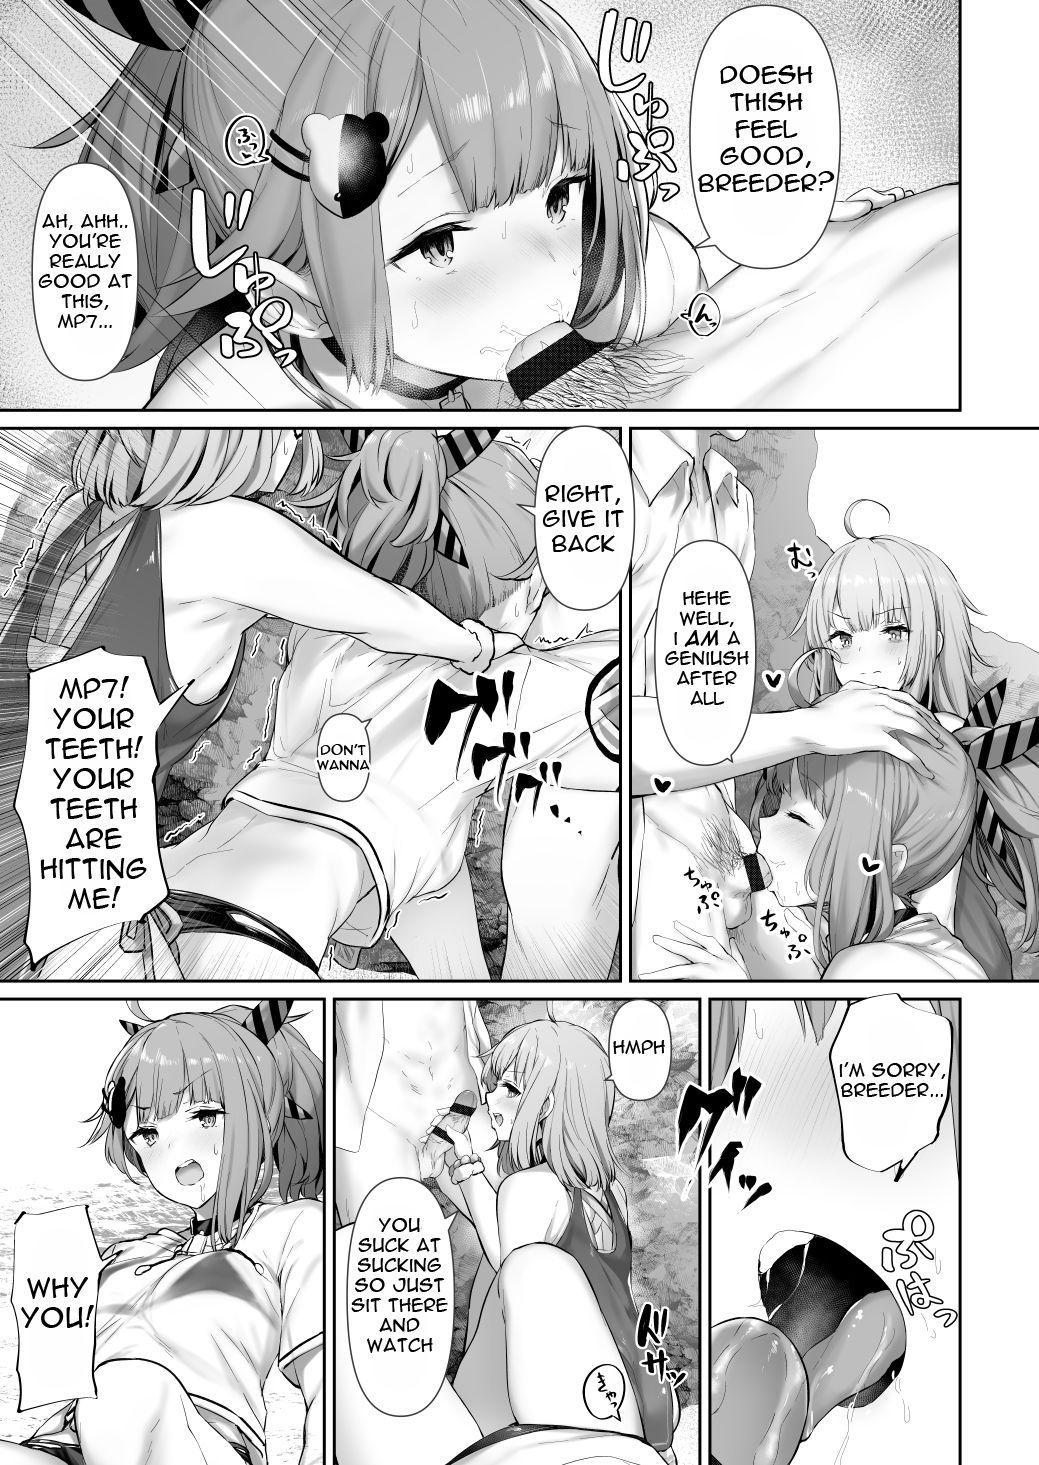 Gay Deepthroat MP7 and AA-12 no - Girls frontline Forwomen - Page 3